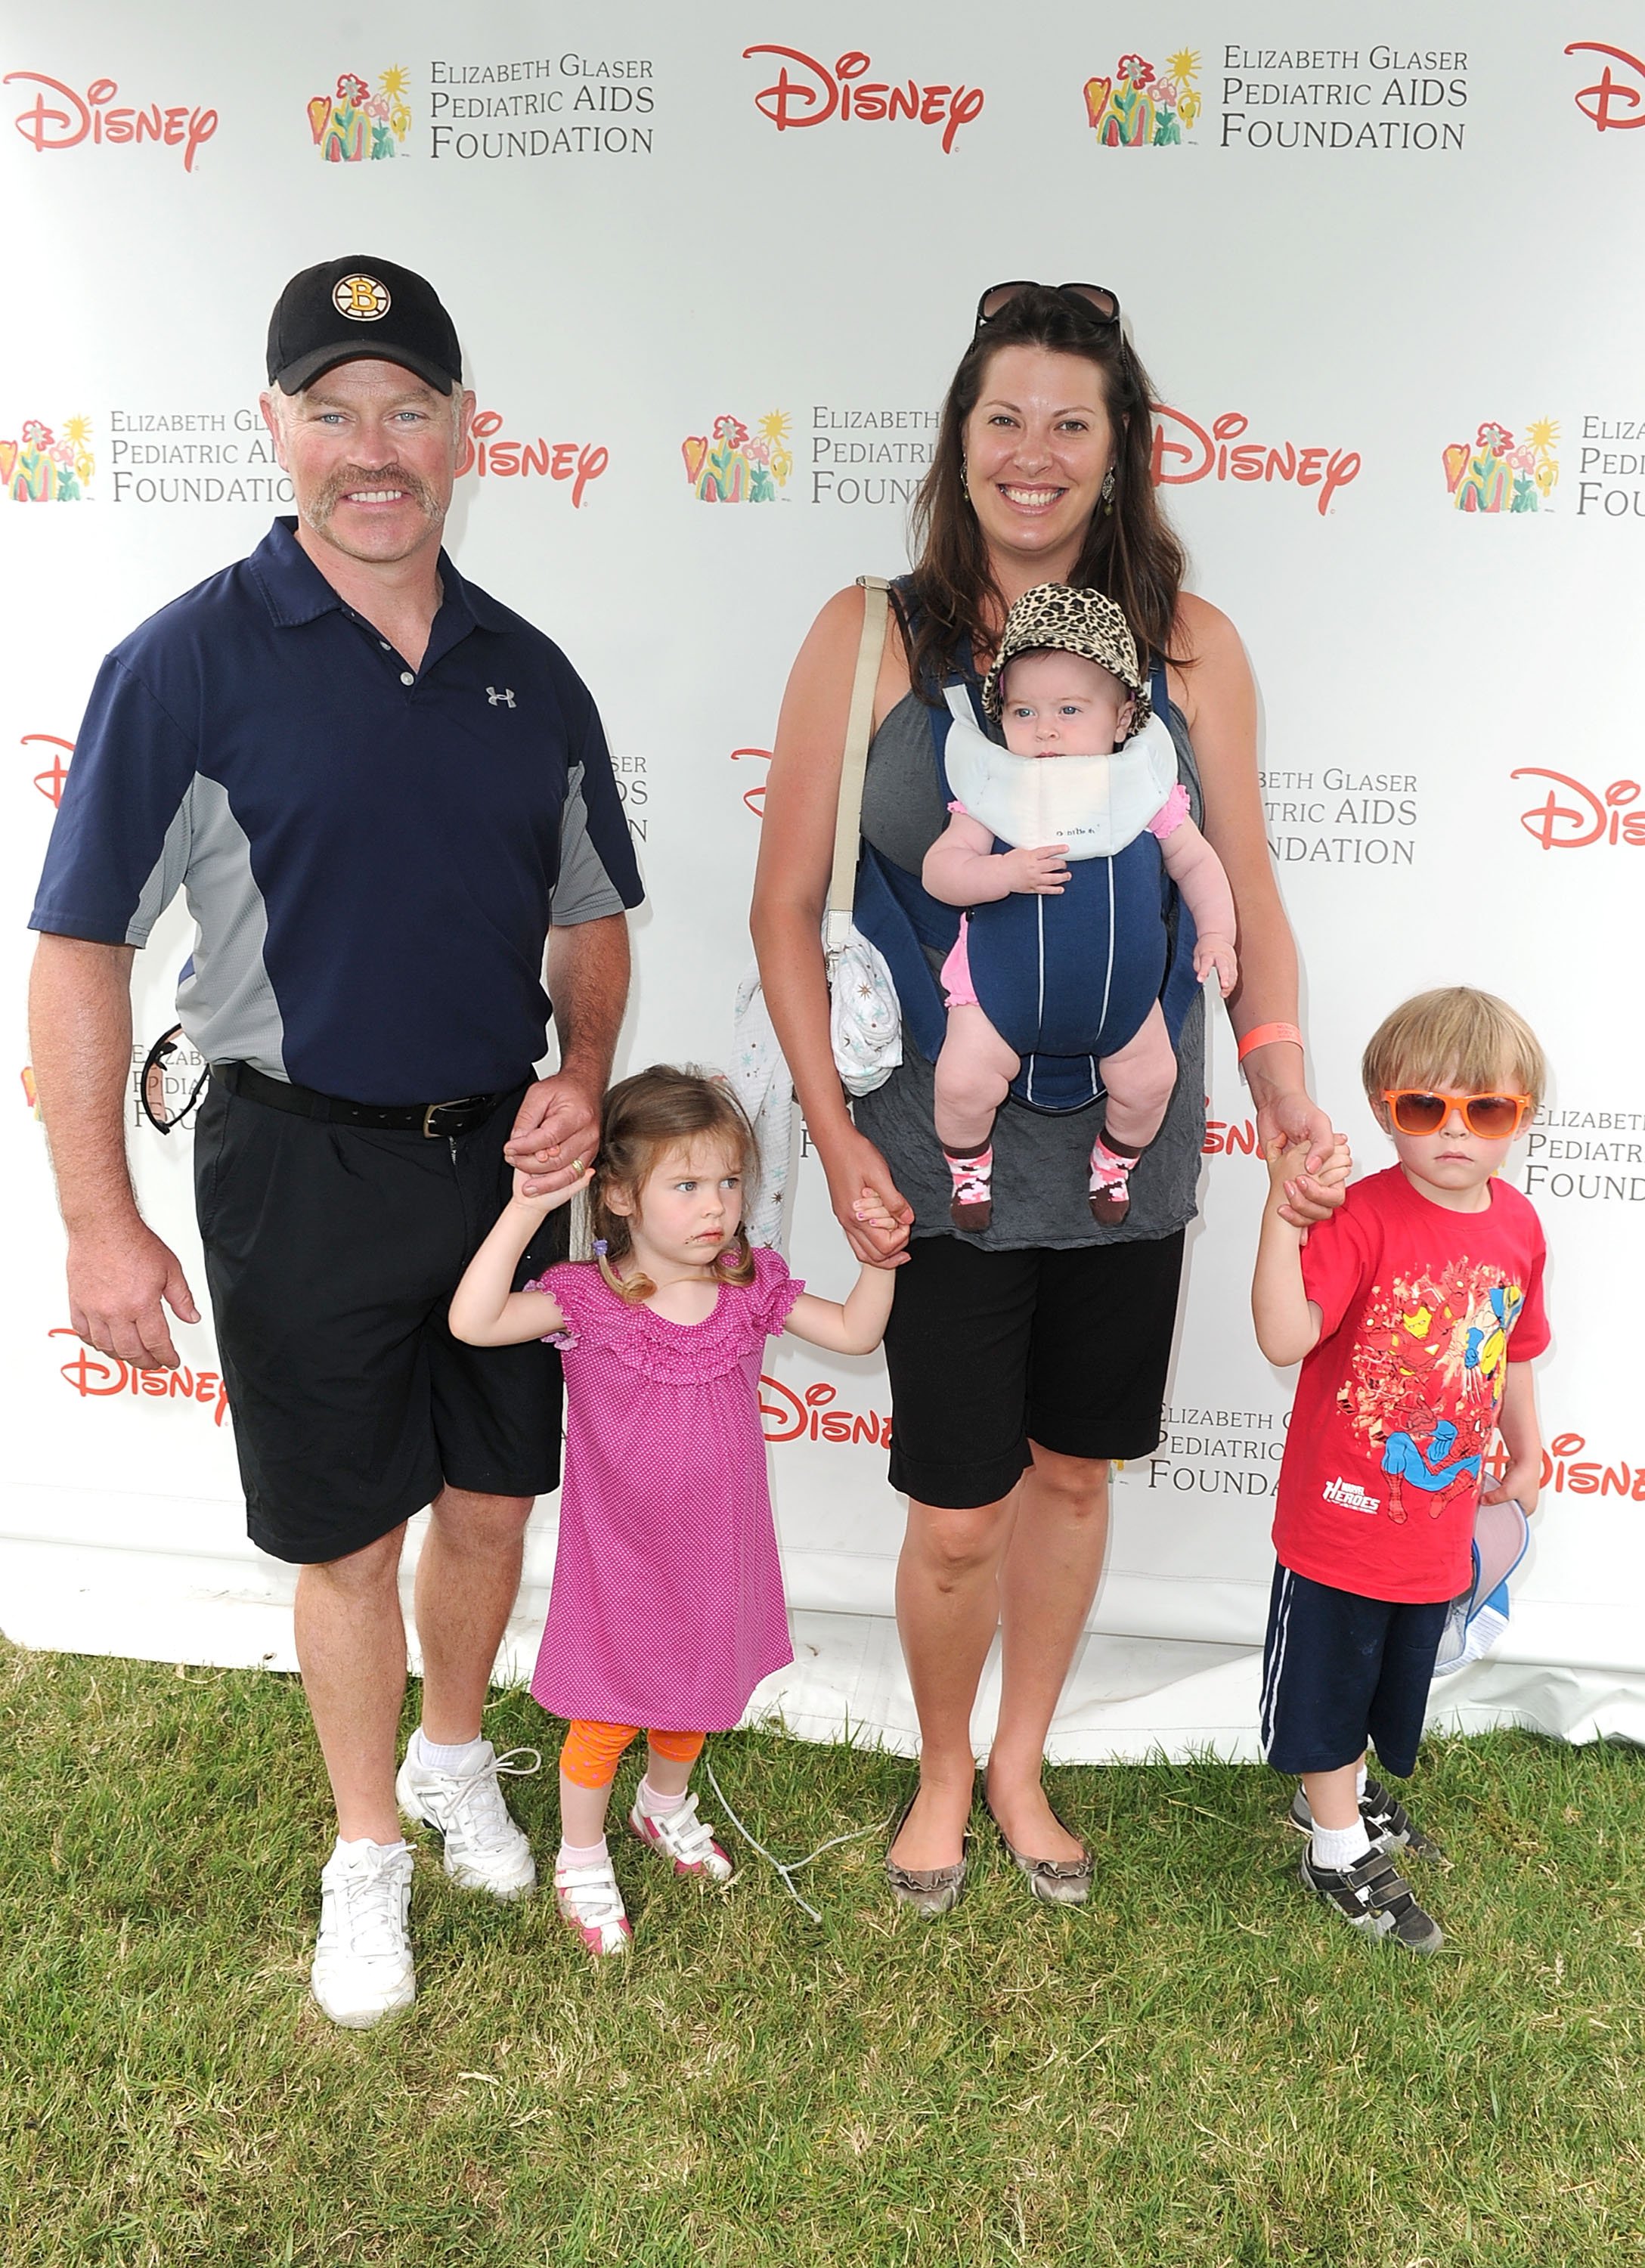 Actor Neal McDonough and wife Ruve McDonough with kids at the 21st A Time For Heroes Celebrity Picnic sponsored by Disney to benefit the Elizabeth Glaser Pediatric Aids Foundation held at Wadsworth Great Lawn on June 13, 2010 in Los Angeles, California. | Source: Getty Images